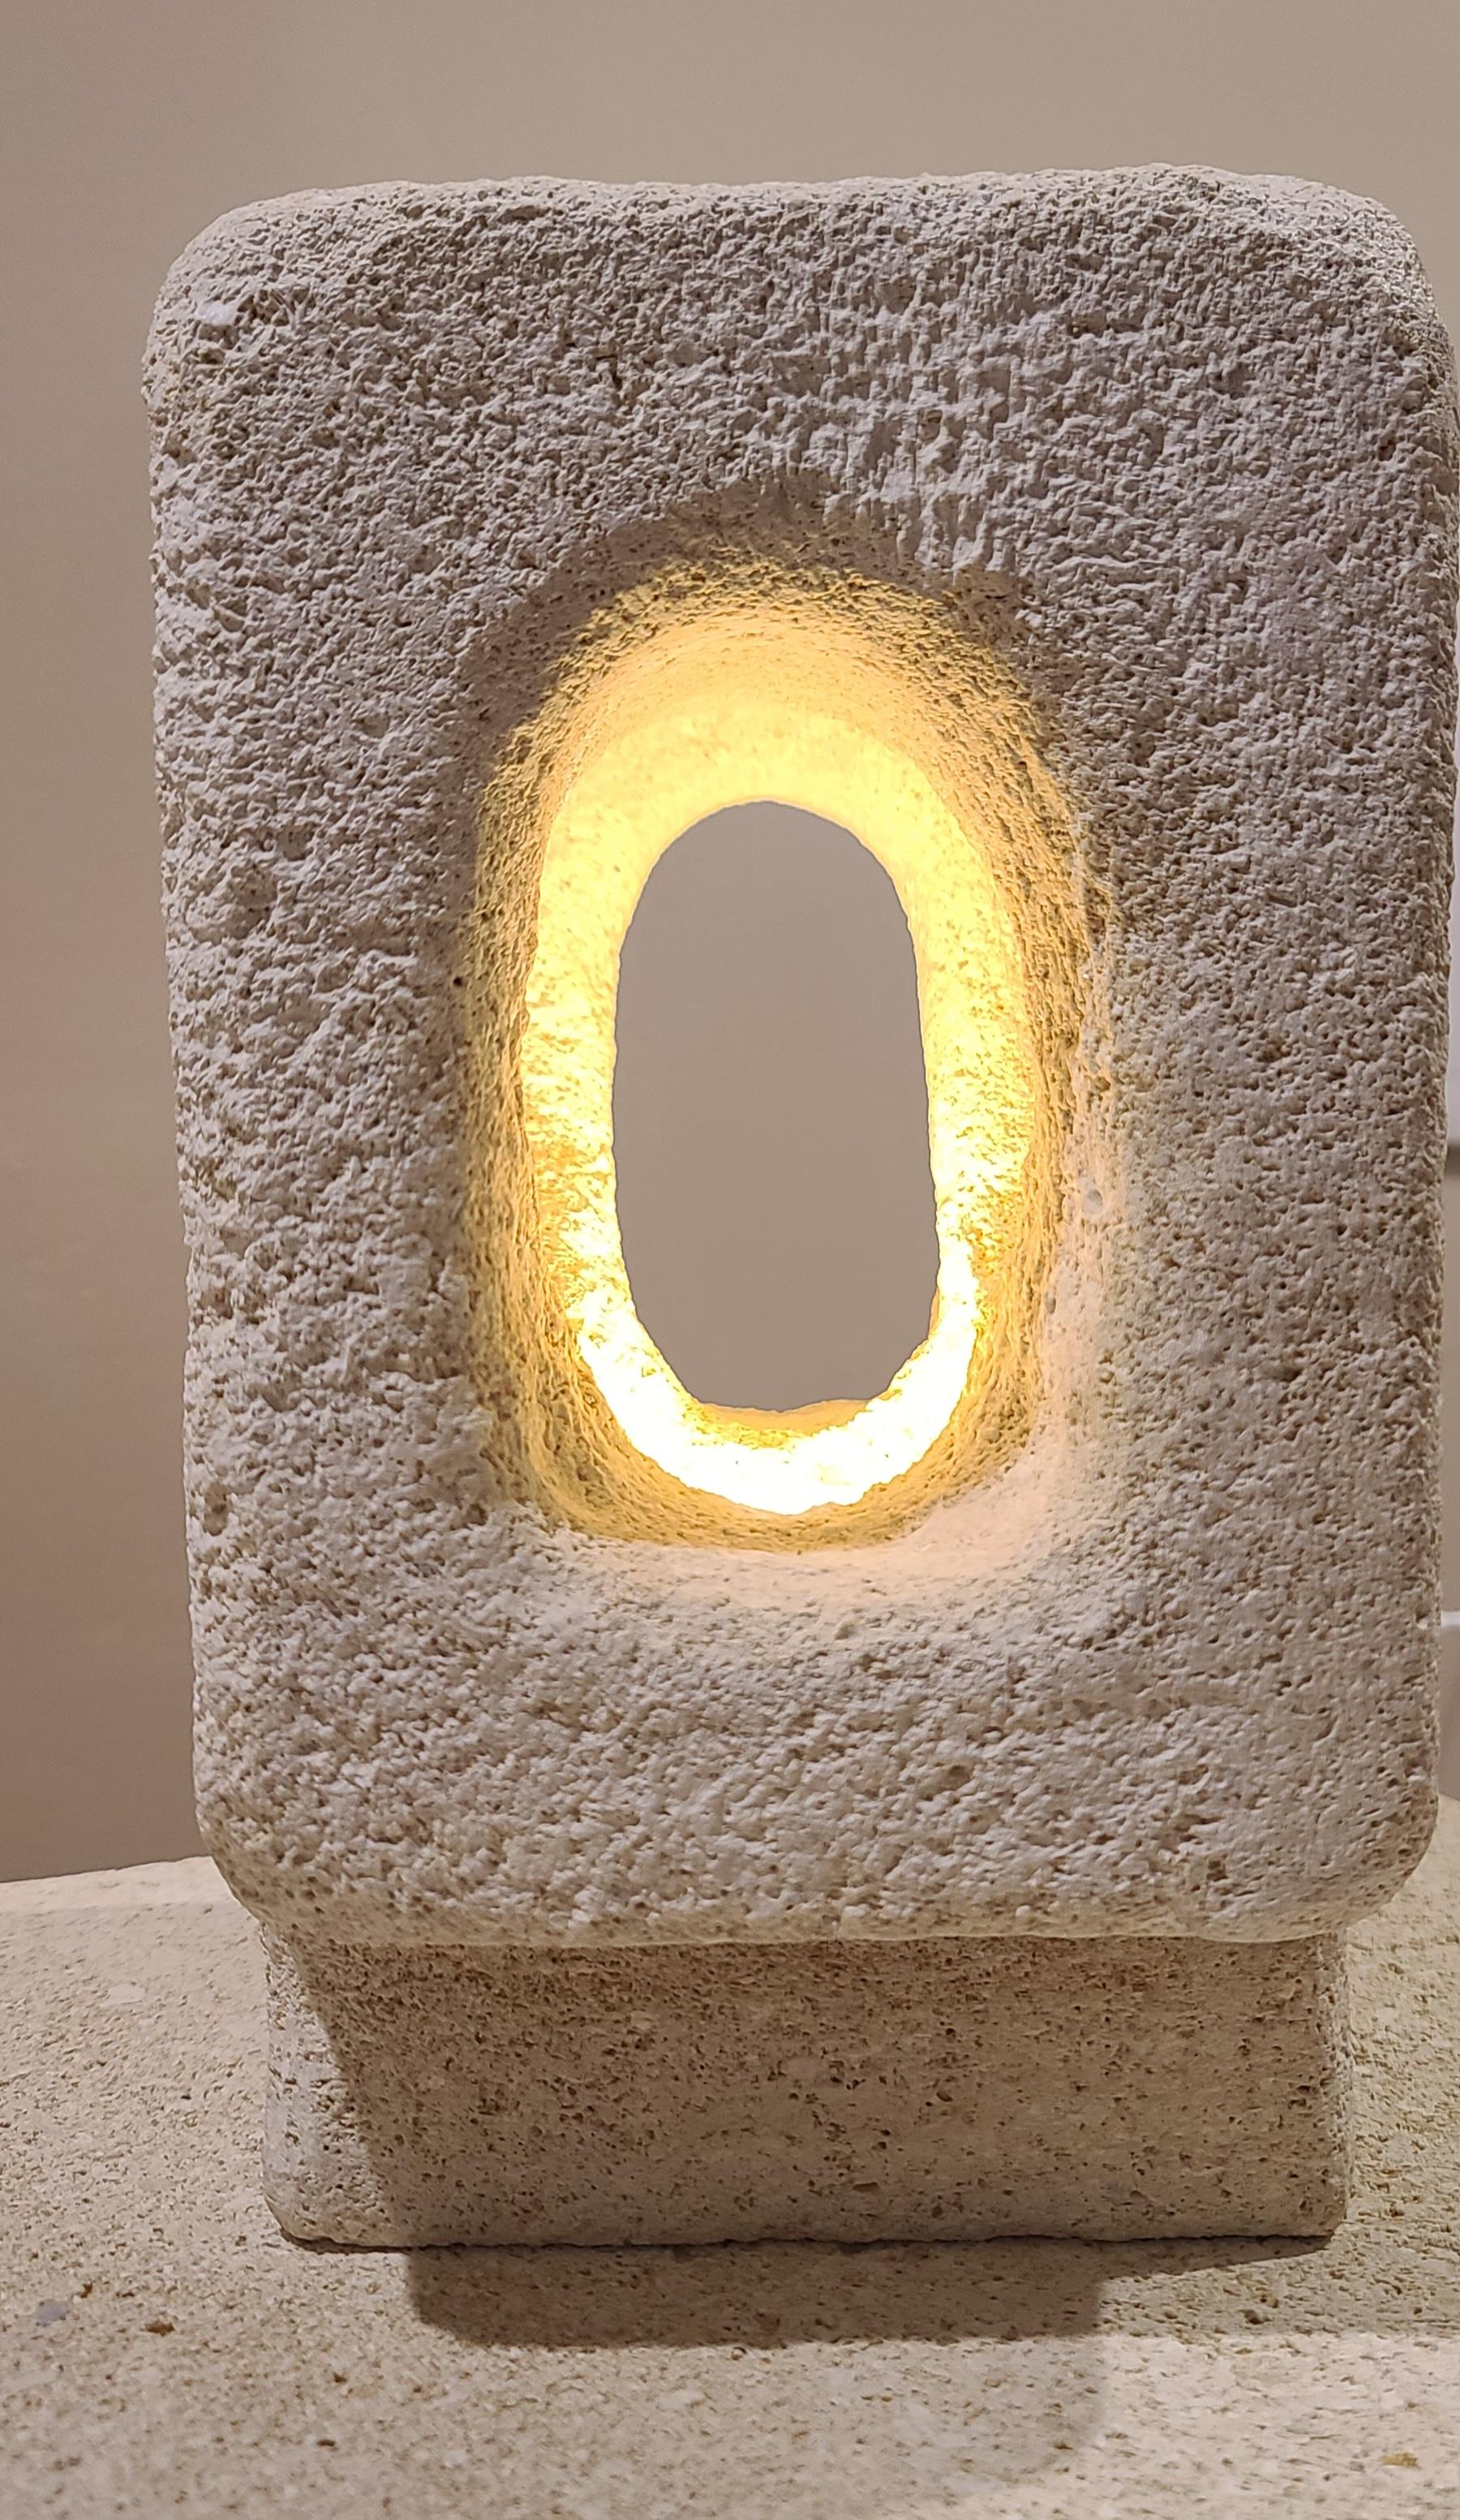 Elevate your space with our exquisite, one-of-a-kind Albamiele lamp. Crafted from genuine sandstone, each lamp is a unique work of art, showcasing the natural beauty and distinct veining of the stone. The warm, ambient glow from the integrated light